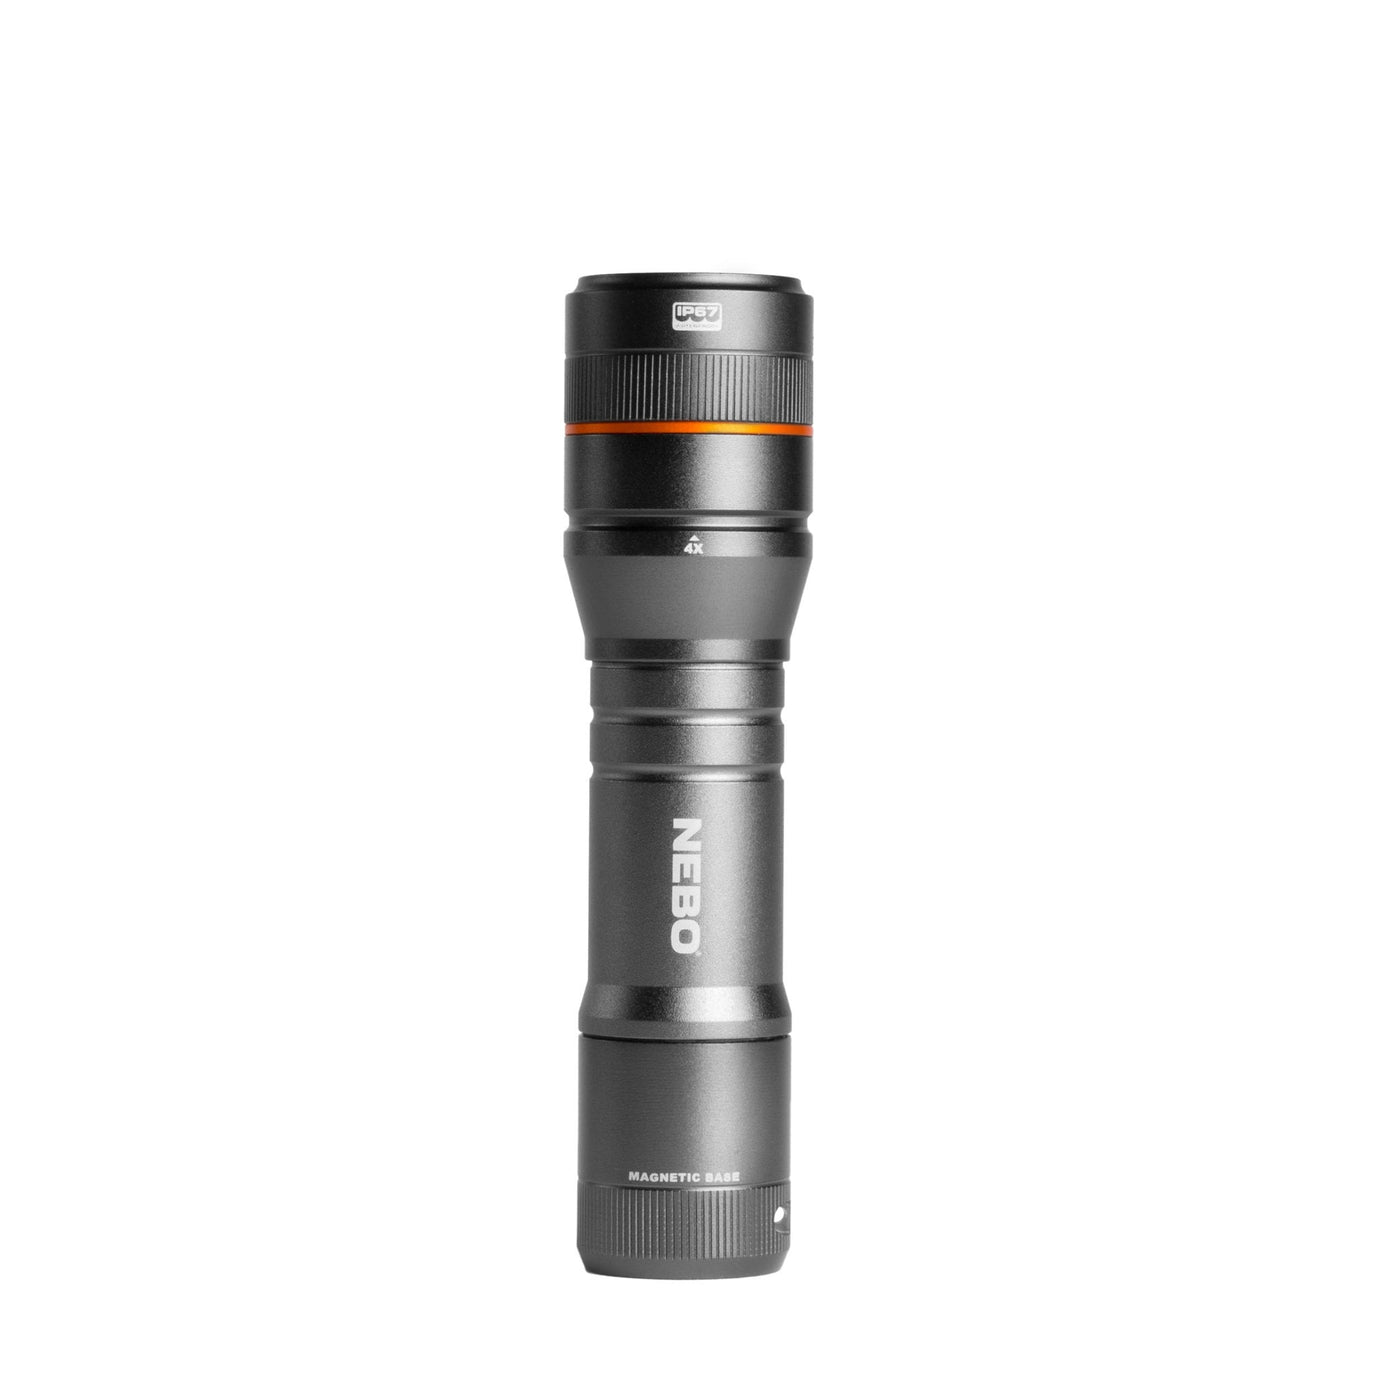 At Nebo Tools, we continually innovate so that we can offer the highest quality LED lighting products at the best price. The Newton™ 500 flashlight by NEBO is a powerful handheld flashlight with 4 light modes. The easy-touch rear positioned switch makes it a breeze to switch between modes and the powerful LED in this flashlight can light up 146 meters.